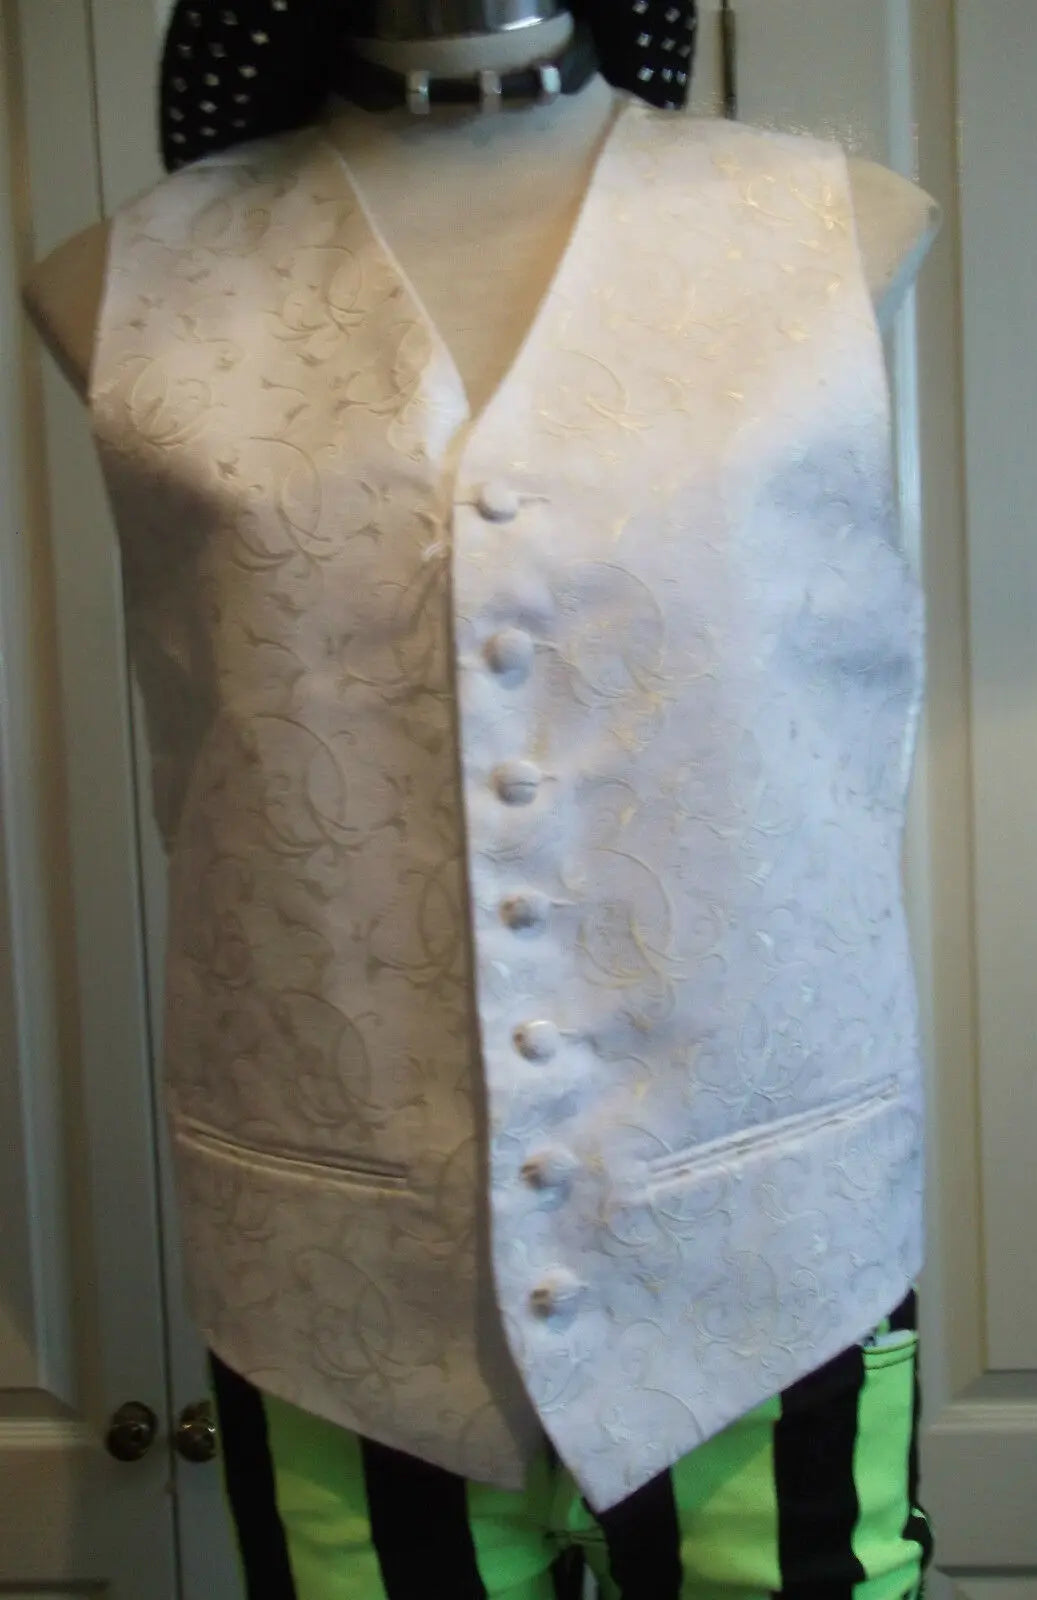 STEAMPUNKcream Vintage Waistcoat.satin back,embroidered fabric,linED.size38"cheS PISCADOR